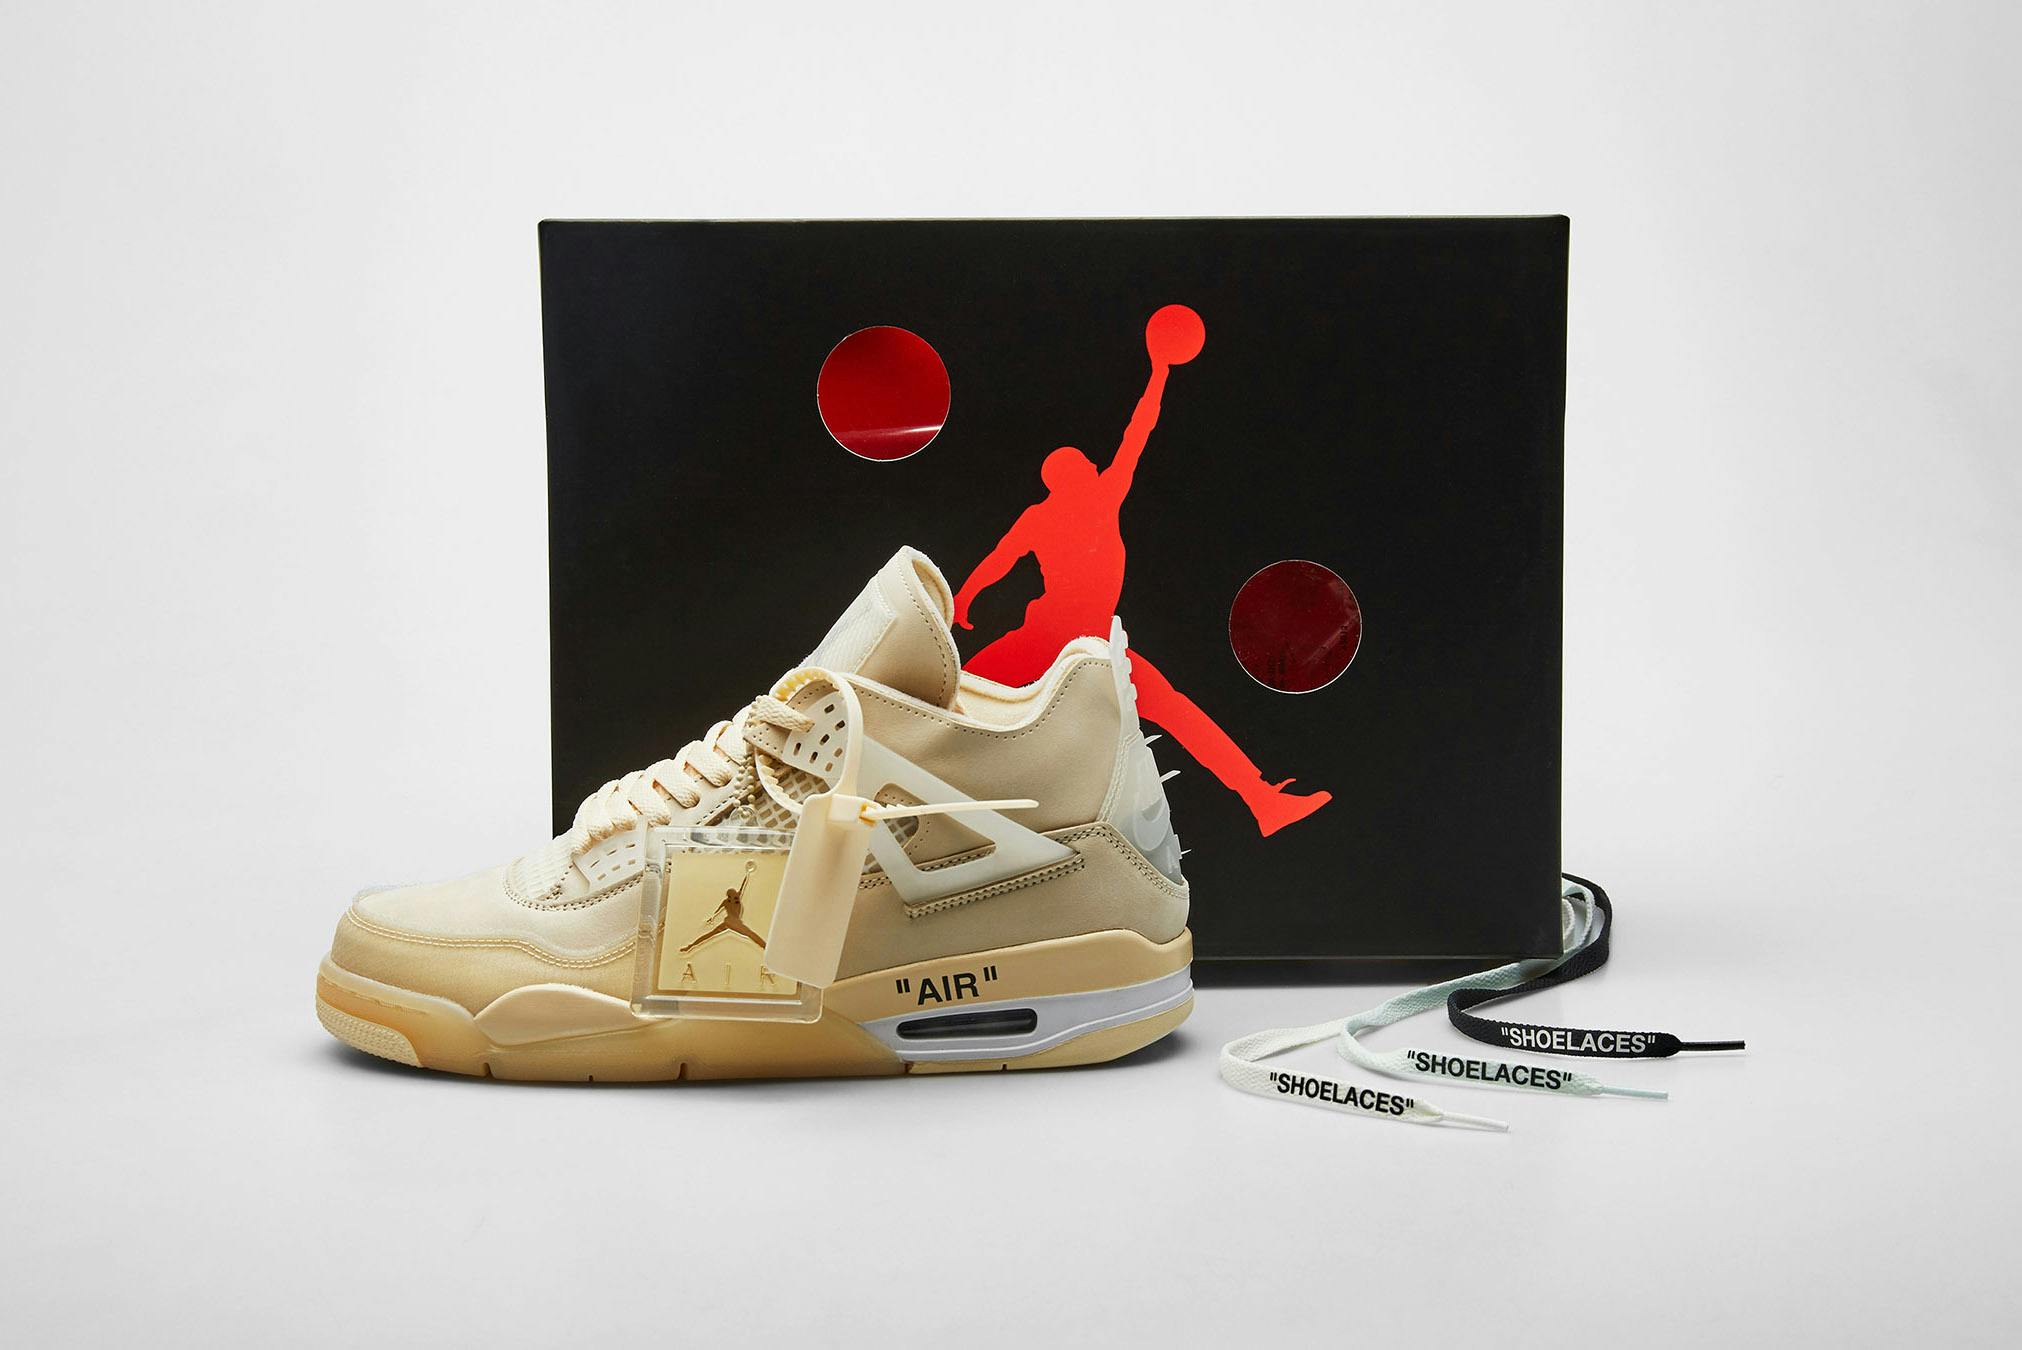 END. Features | Nike x Off-White Air Jordan W - Register Now on